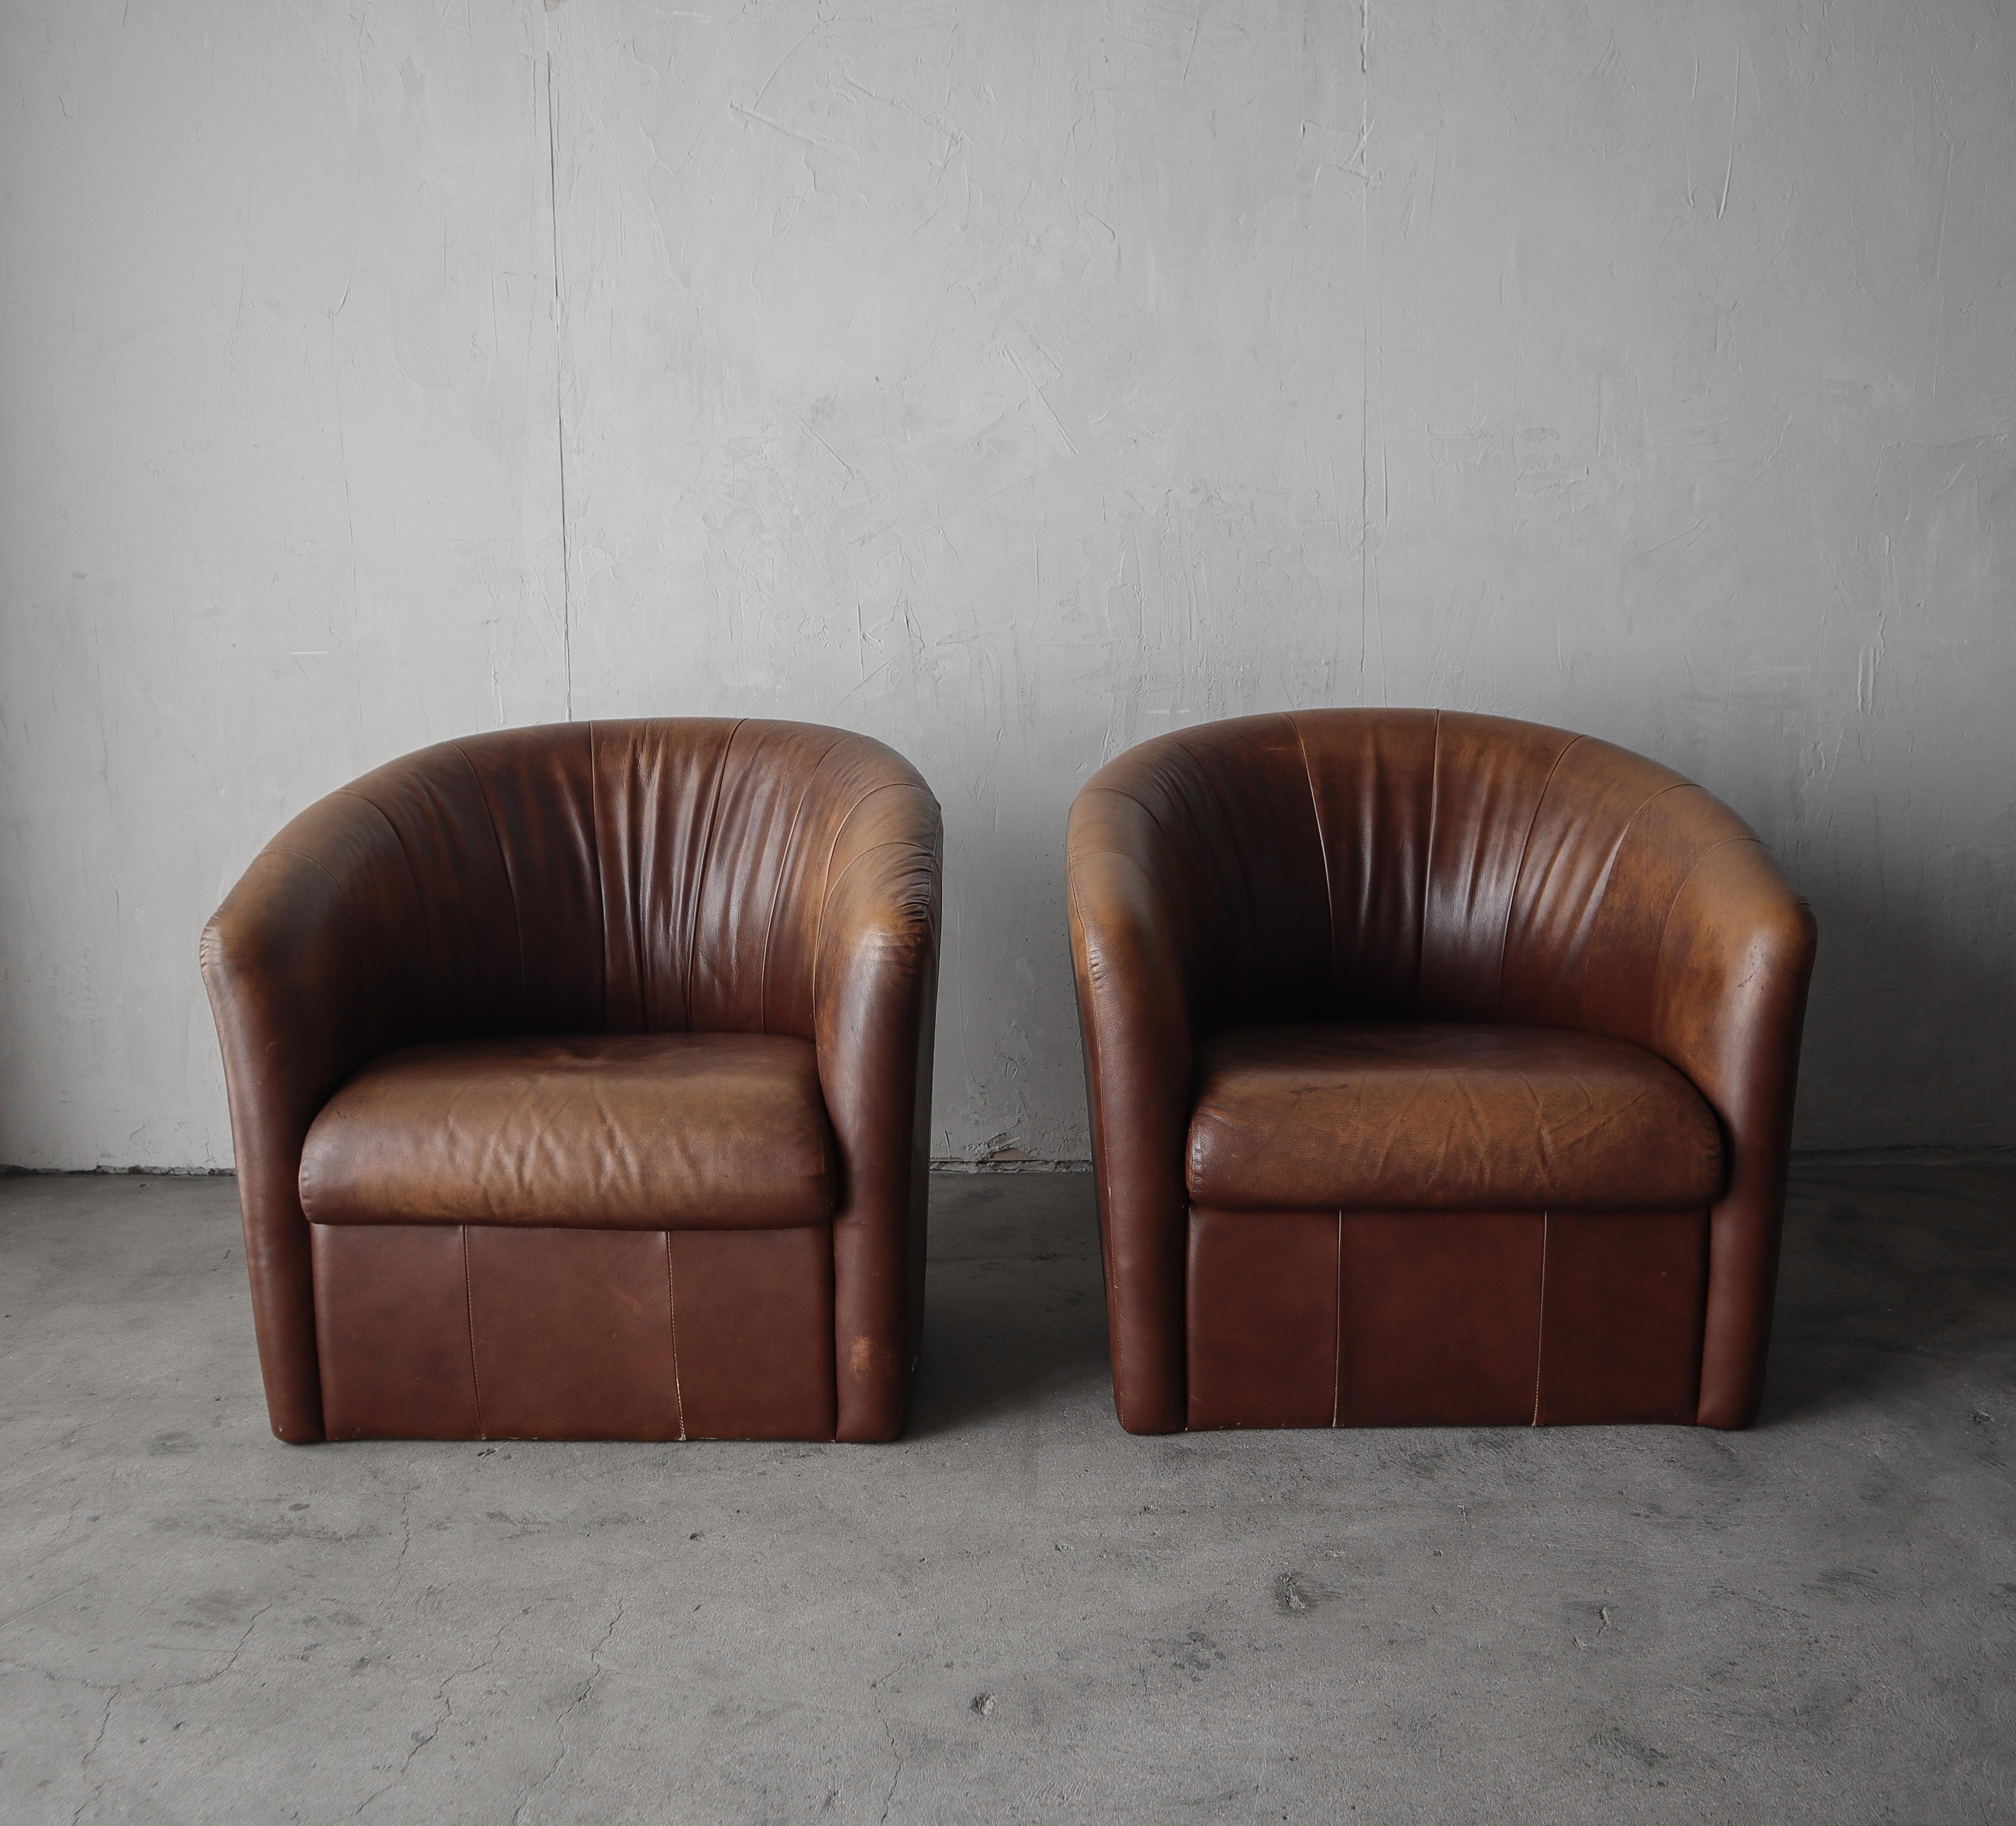 A beautiful pair of properly patinaed leather club chairs.  If you've been looking for a hardy dose of leather character to add to your eclectic space or man cave, look no further, these guys are oozing. 

The chairs are structurally sound and very